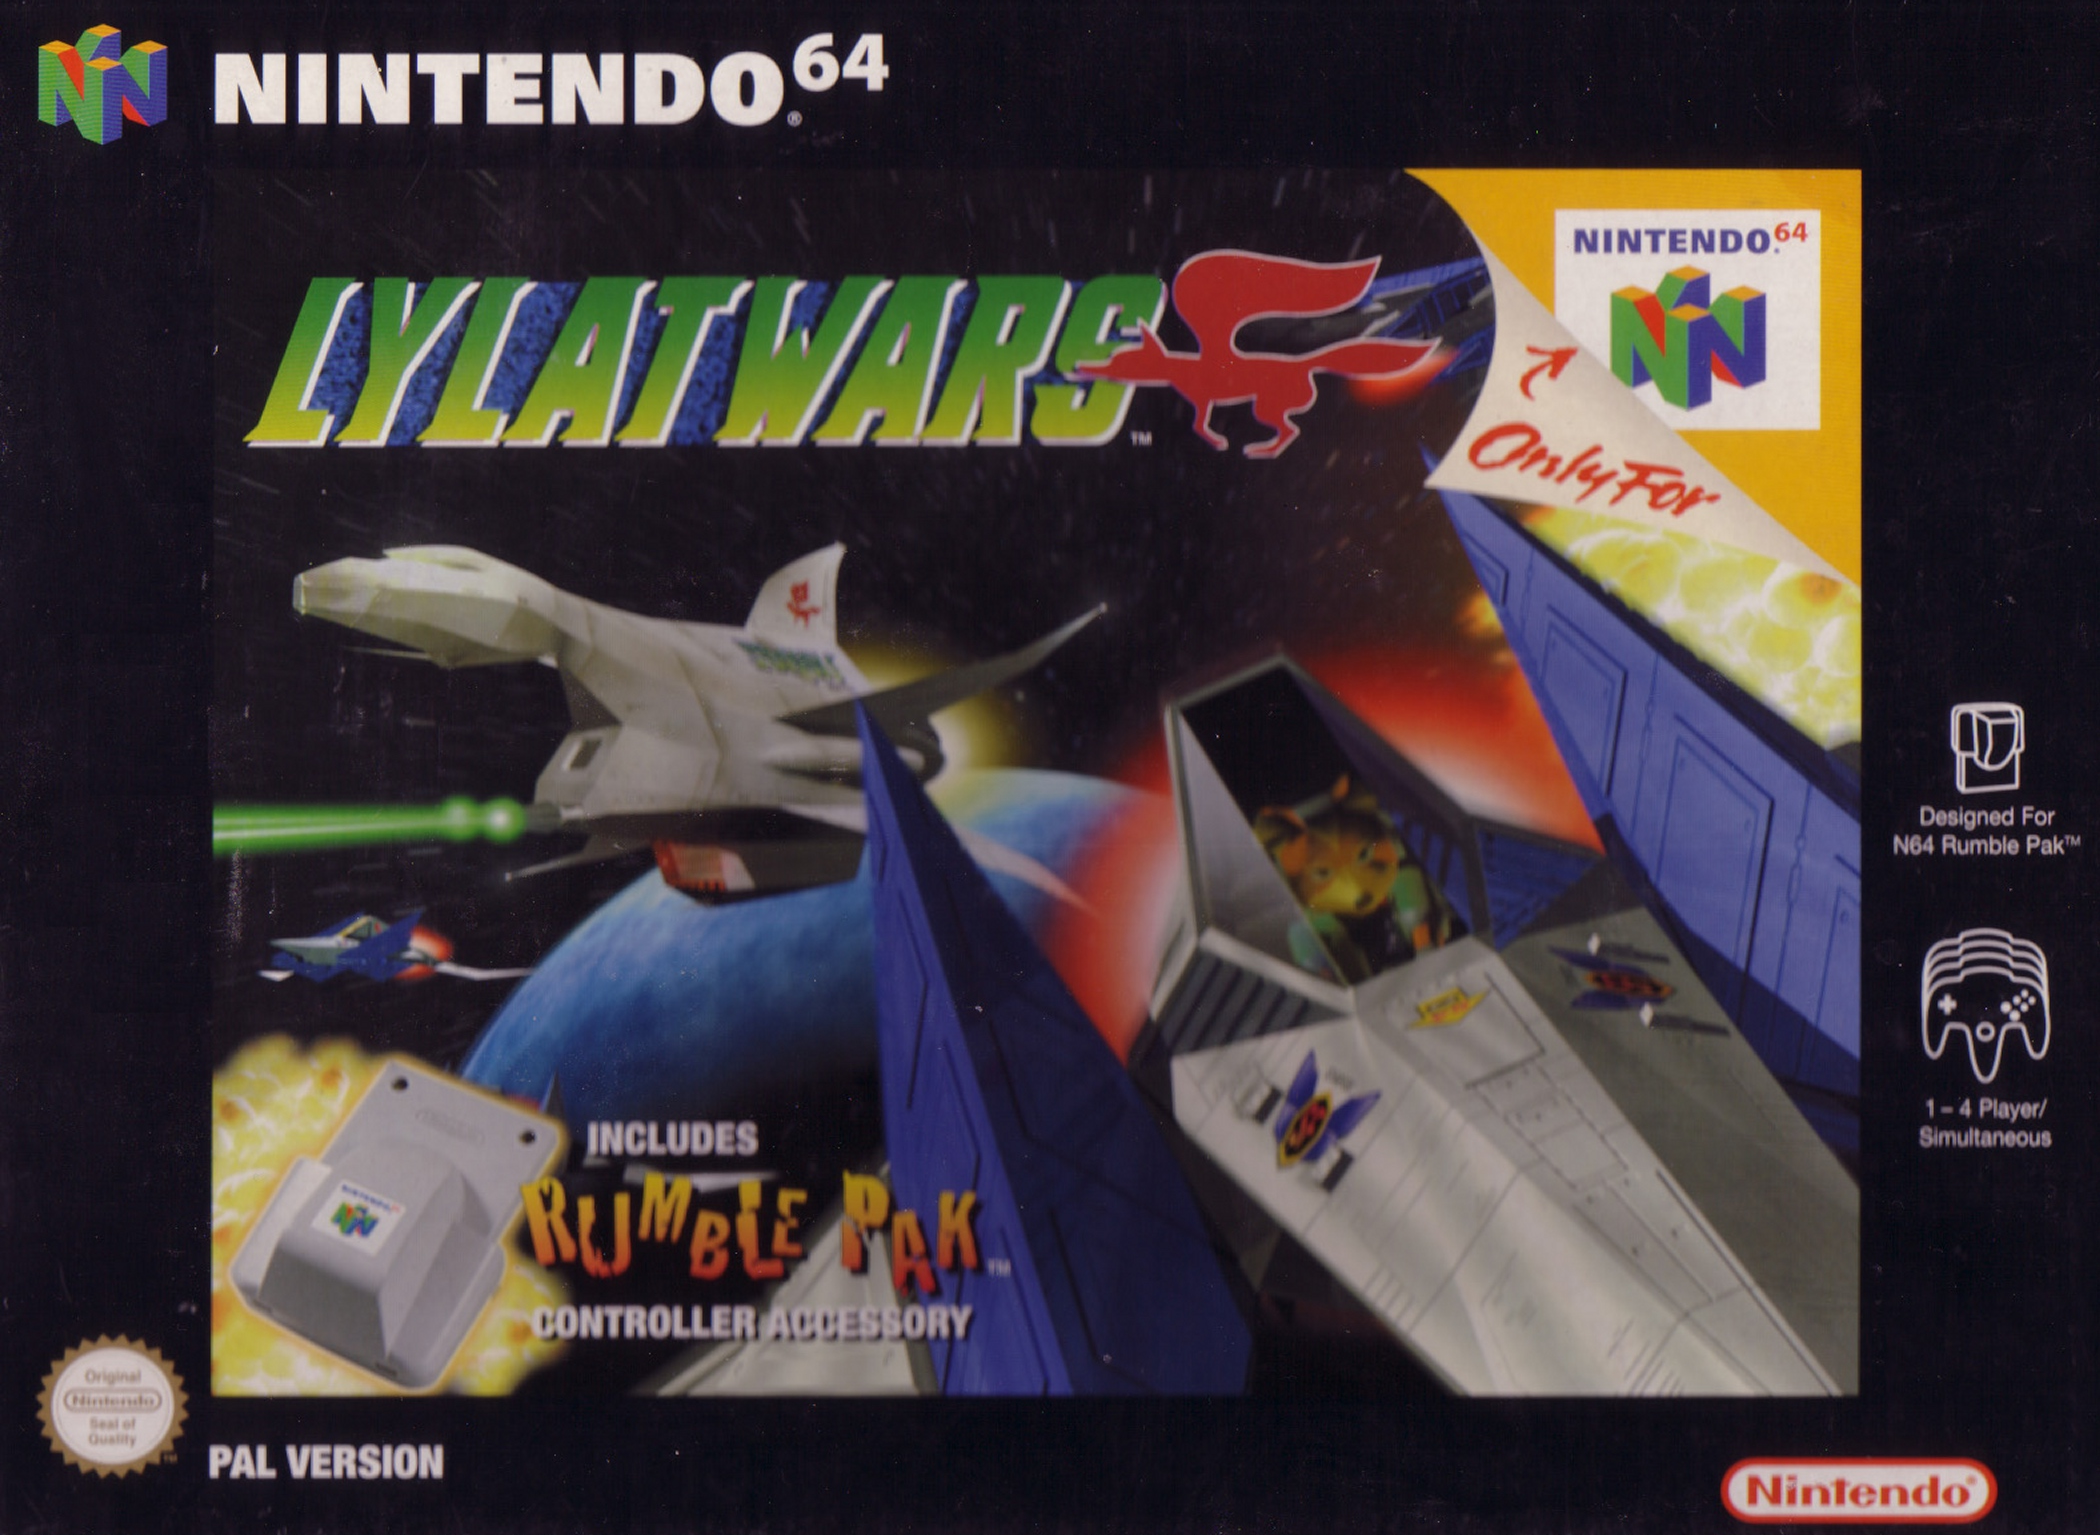 Star Fox Command Images - LaunchBox Games Database